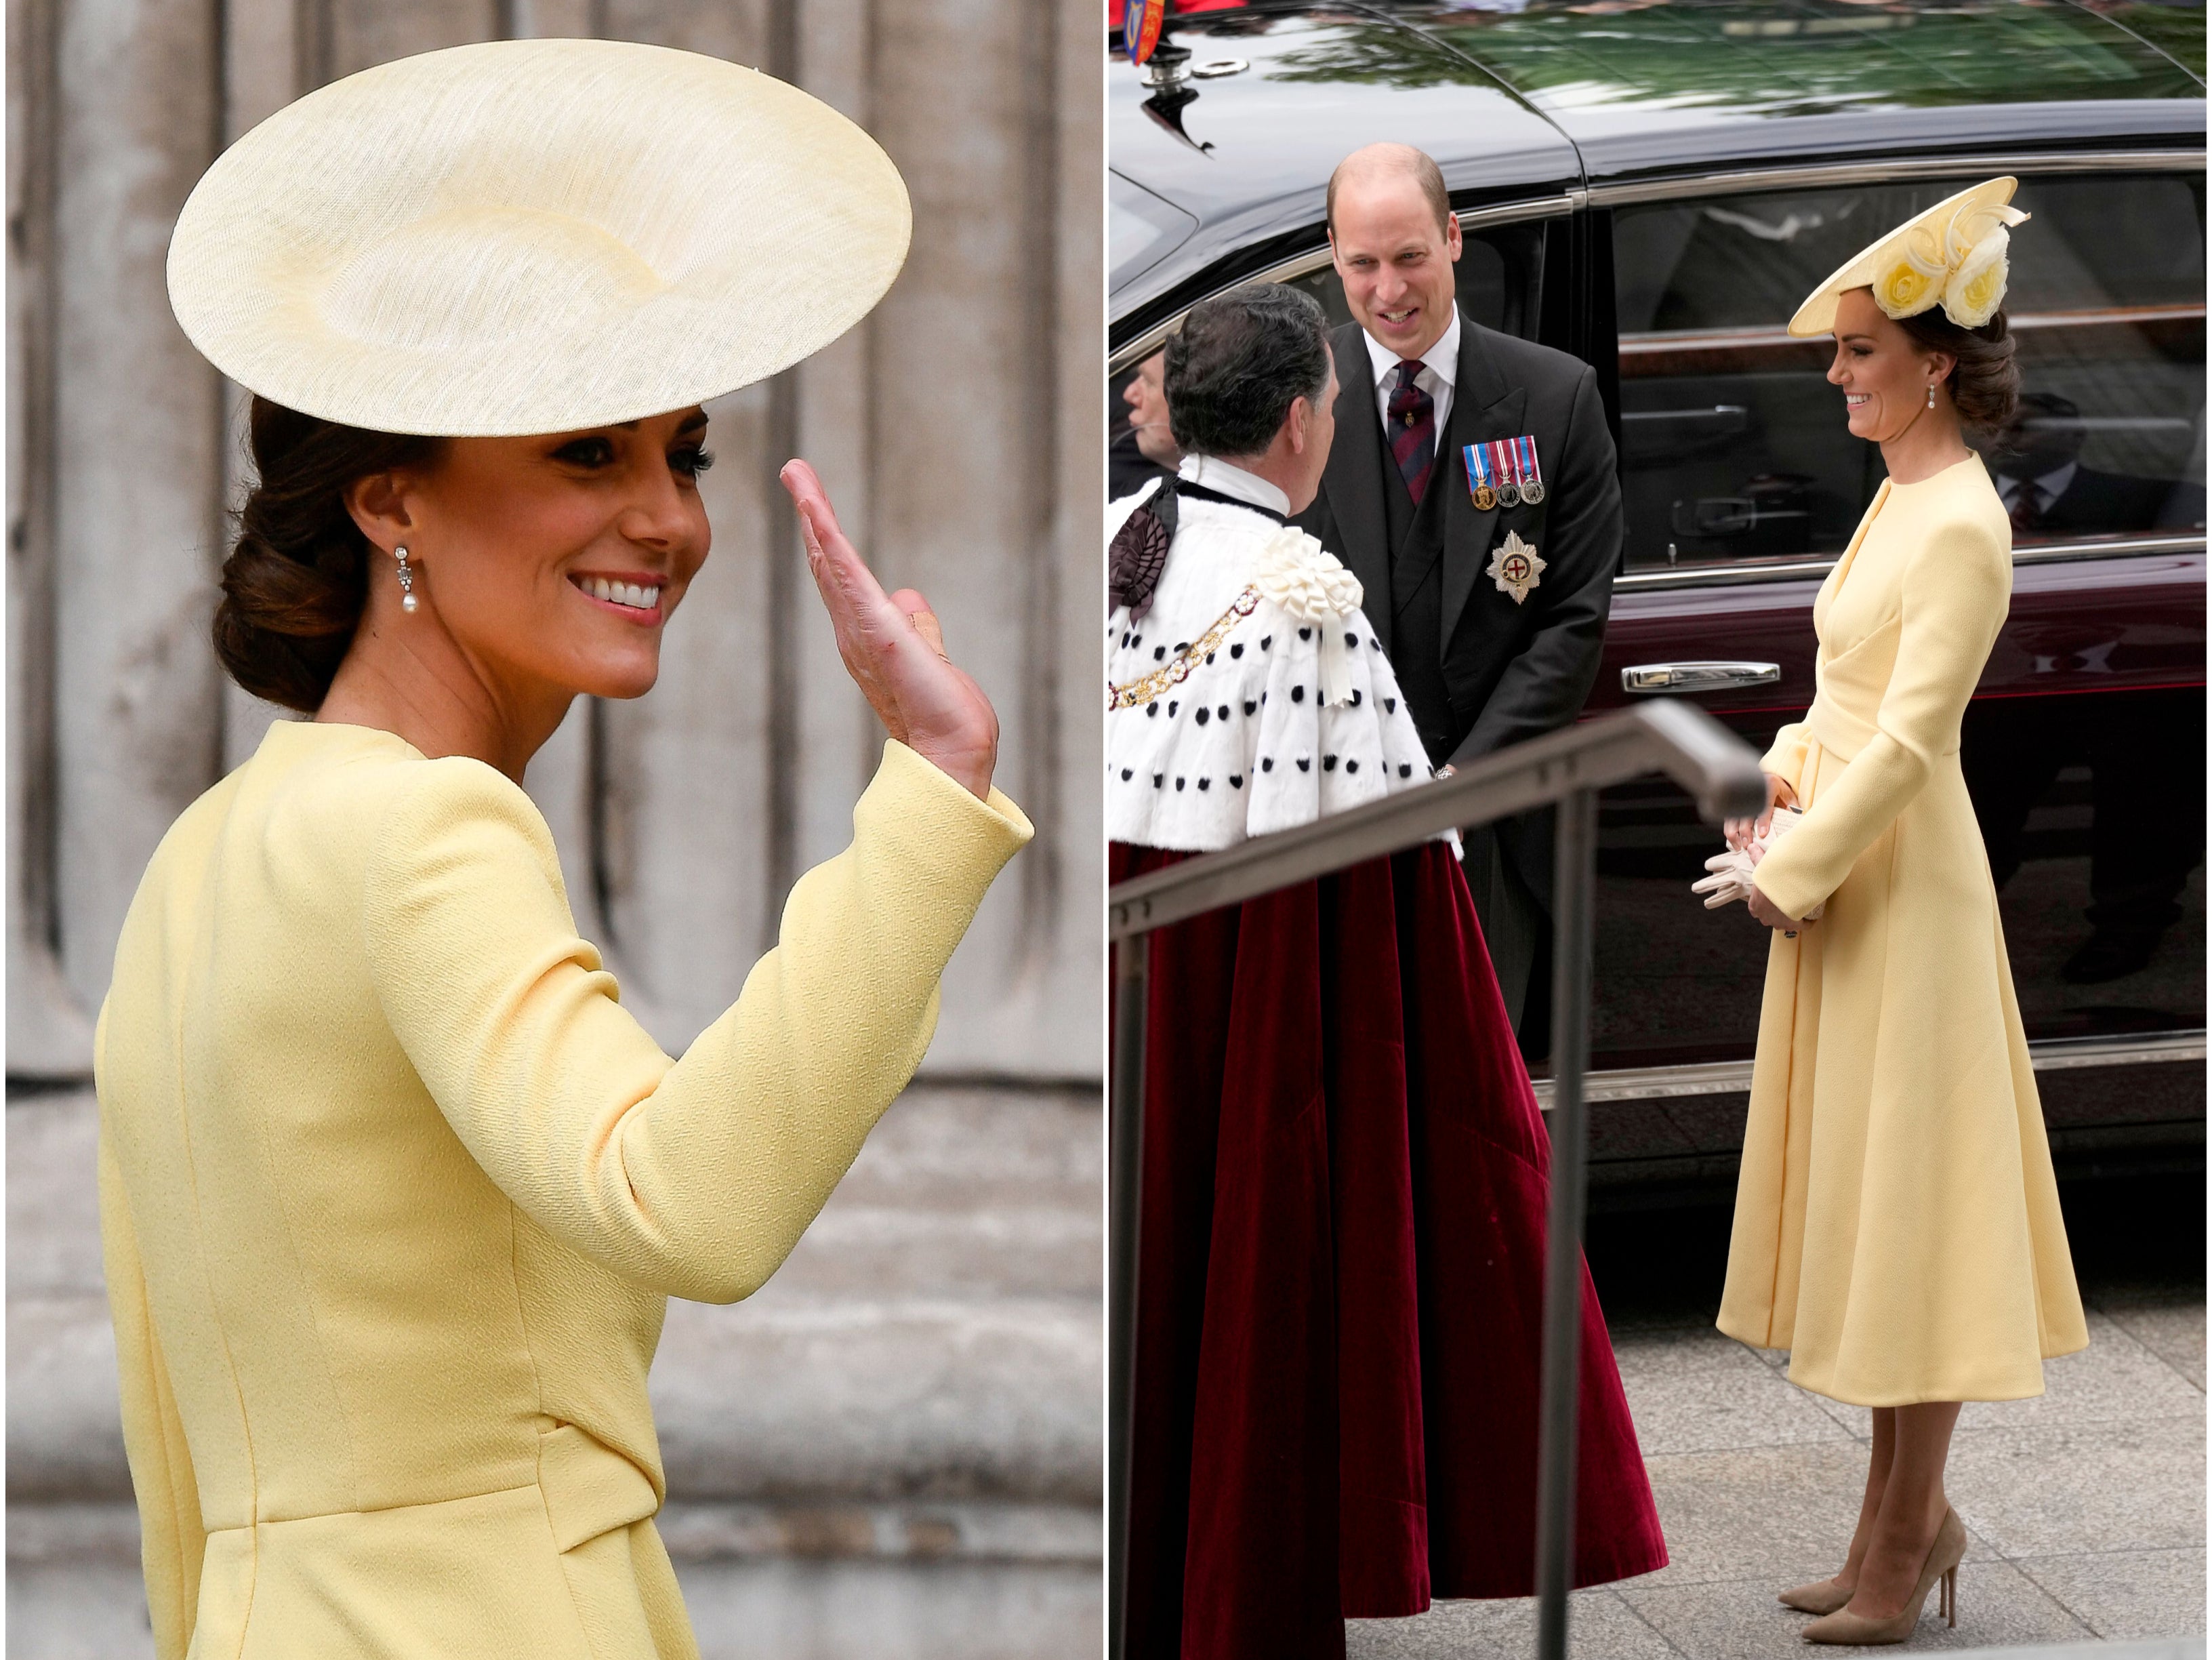 The Duchess of Cambridge opted for yellow